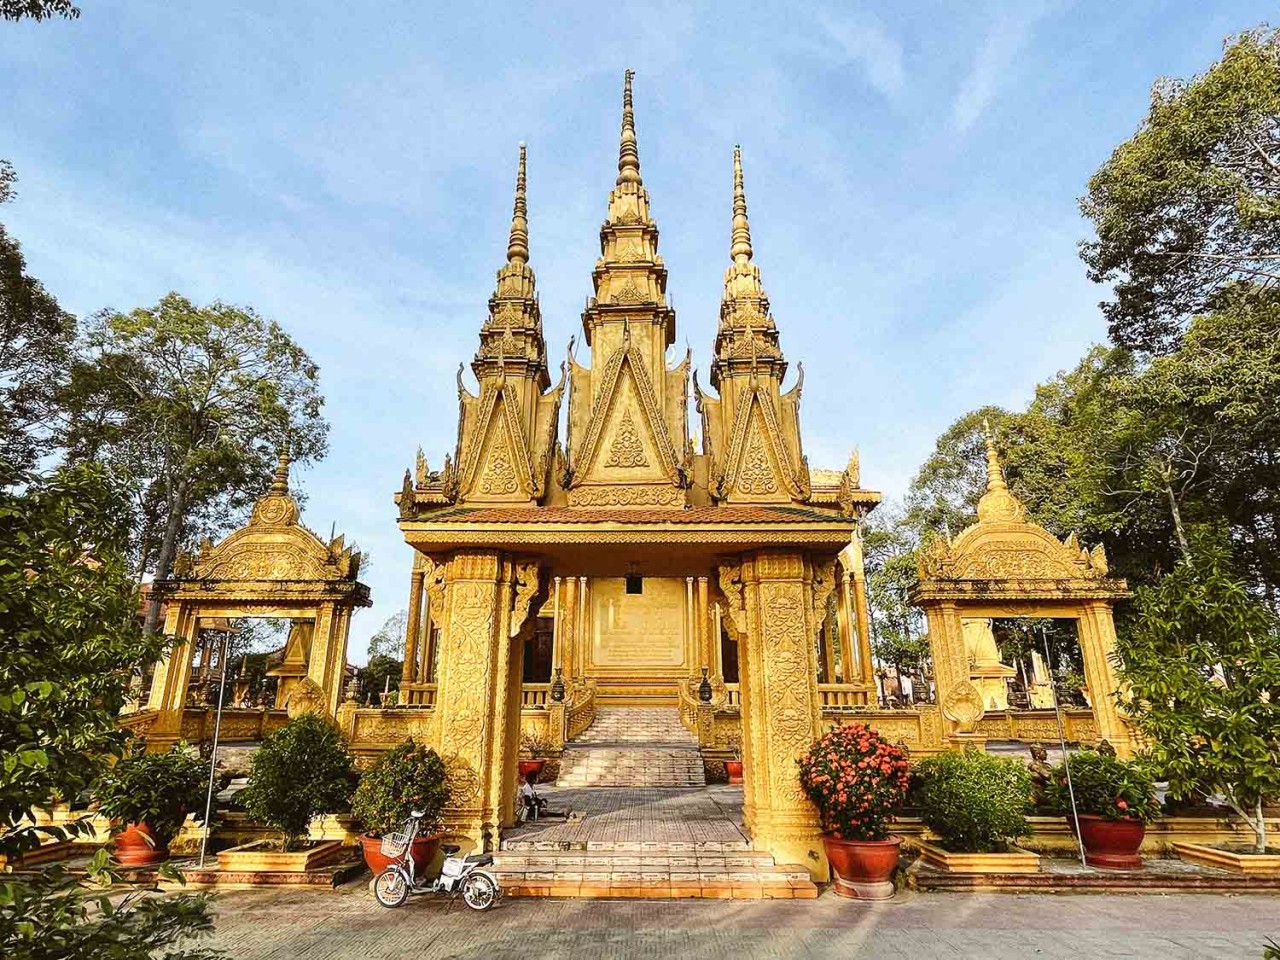 Explore Vam Ray - The 600-Year-Old Khmer Pagoda In Tra Vinh